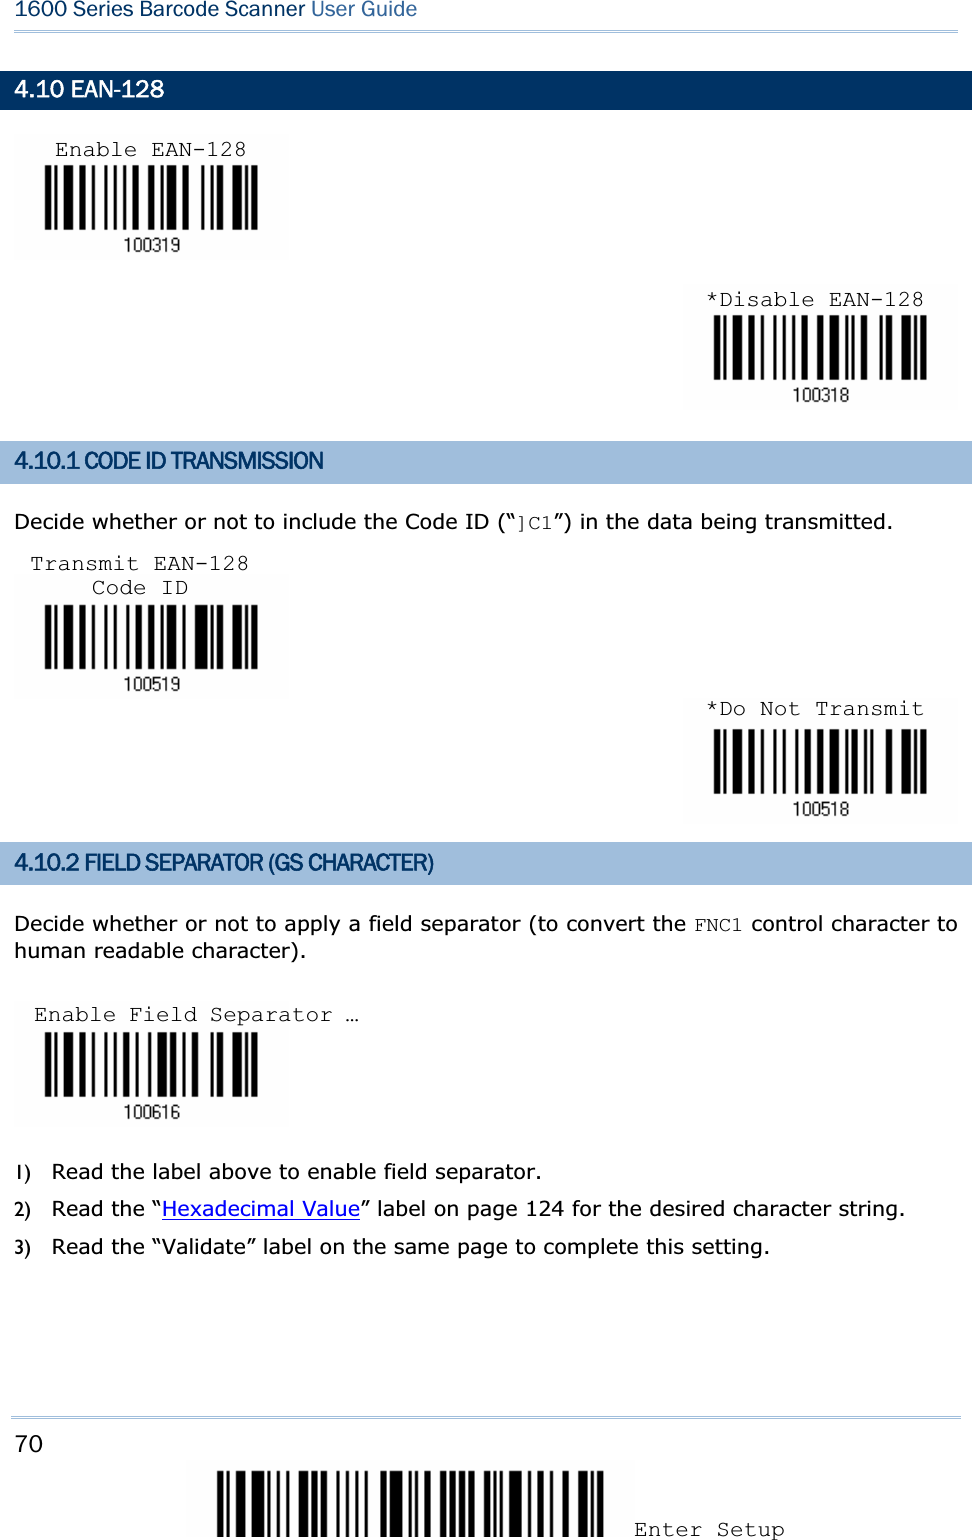 70Enter Setup 1600 Series Barcode Scanner User Guide4.10 EAN-128 4.10.1 CODE ID TRANSMISSION Decide whether or not to include the Code ID (“]C1”) in the data being transmitted. 4.10.2 FIELD SEPARATOR (GS CHARACTER) Decide whether or not to apply a field separator (to convert the FNC1 control character to human readable character). 1) Read the label above to enable field separator. 2) Read the “Hexadecimal Value” label on page 124 for the desired character string.   3) Read the “Validate” label on the same page to complete this setting. Enable EAN-128*Disable EAN-128Transmit EAN-128 Code ID*Do Not TransmitEnable Field Separator … 